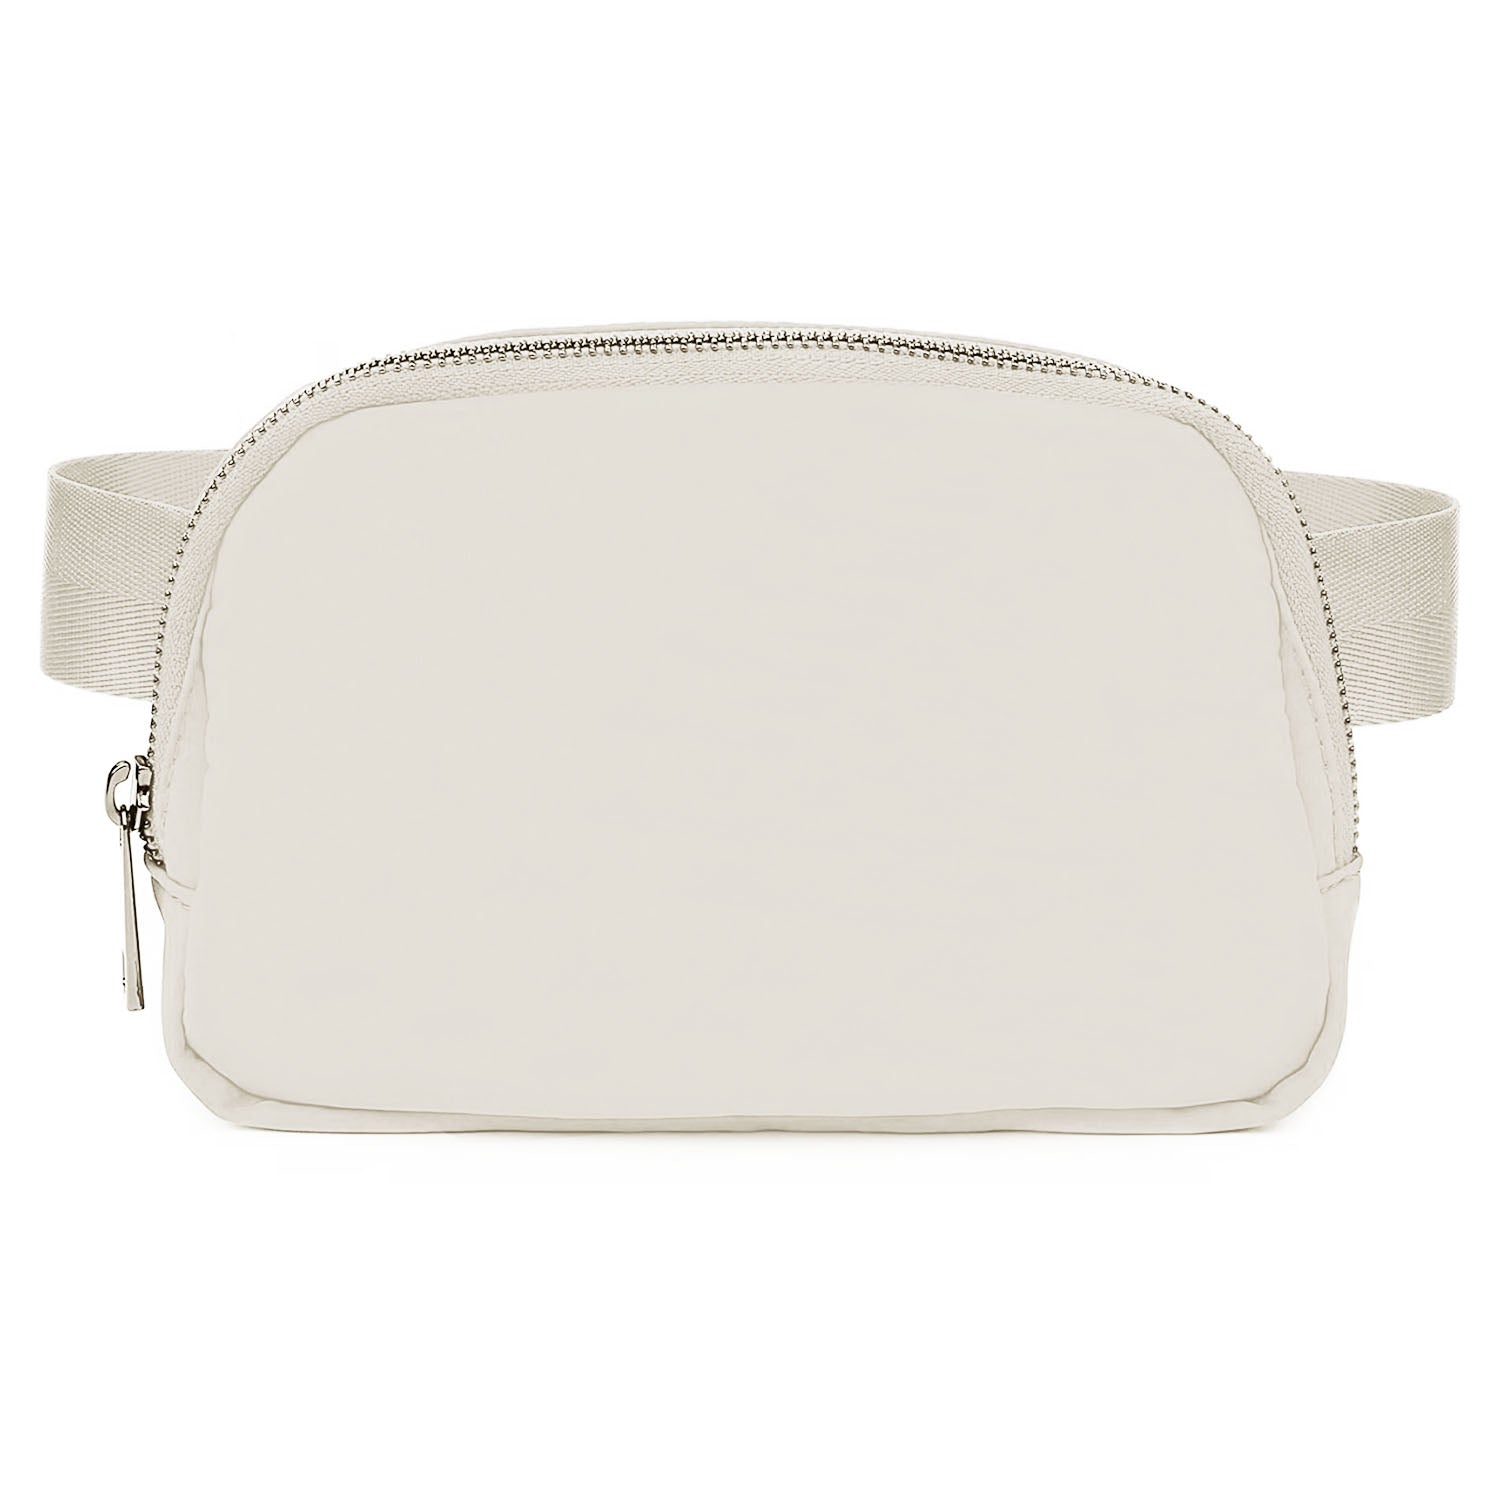 title:Sport Fanny Pack Unisex Waist Pouch Belt Bag Purse Chest Bag for Outdoor Sport Travel Beach Concerts Travel 20.86in-35.03in Waist Circumference with A;color:White